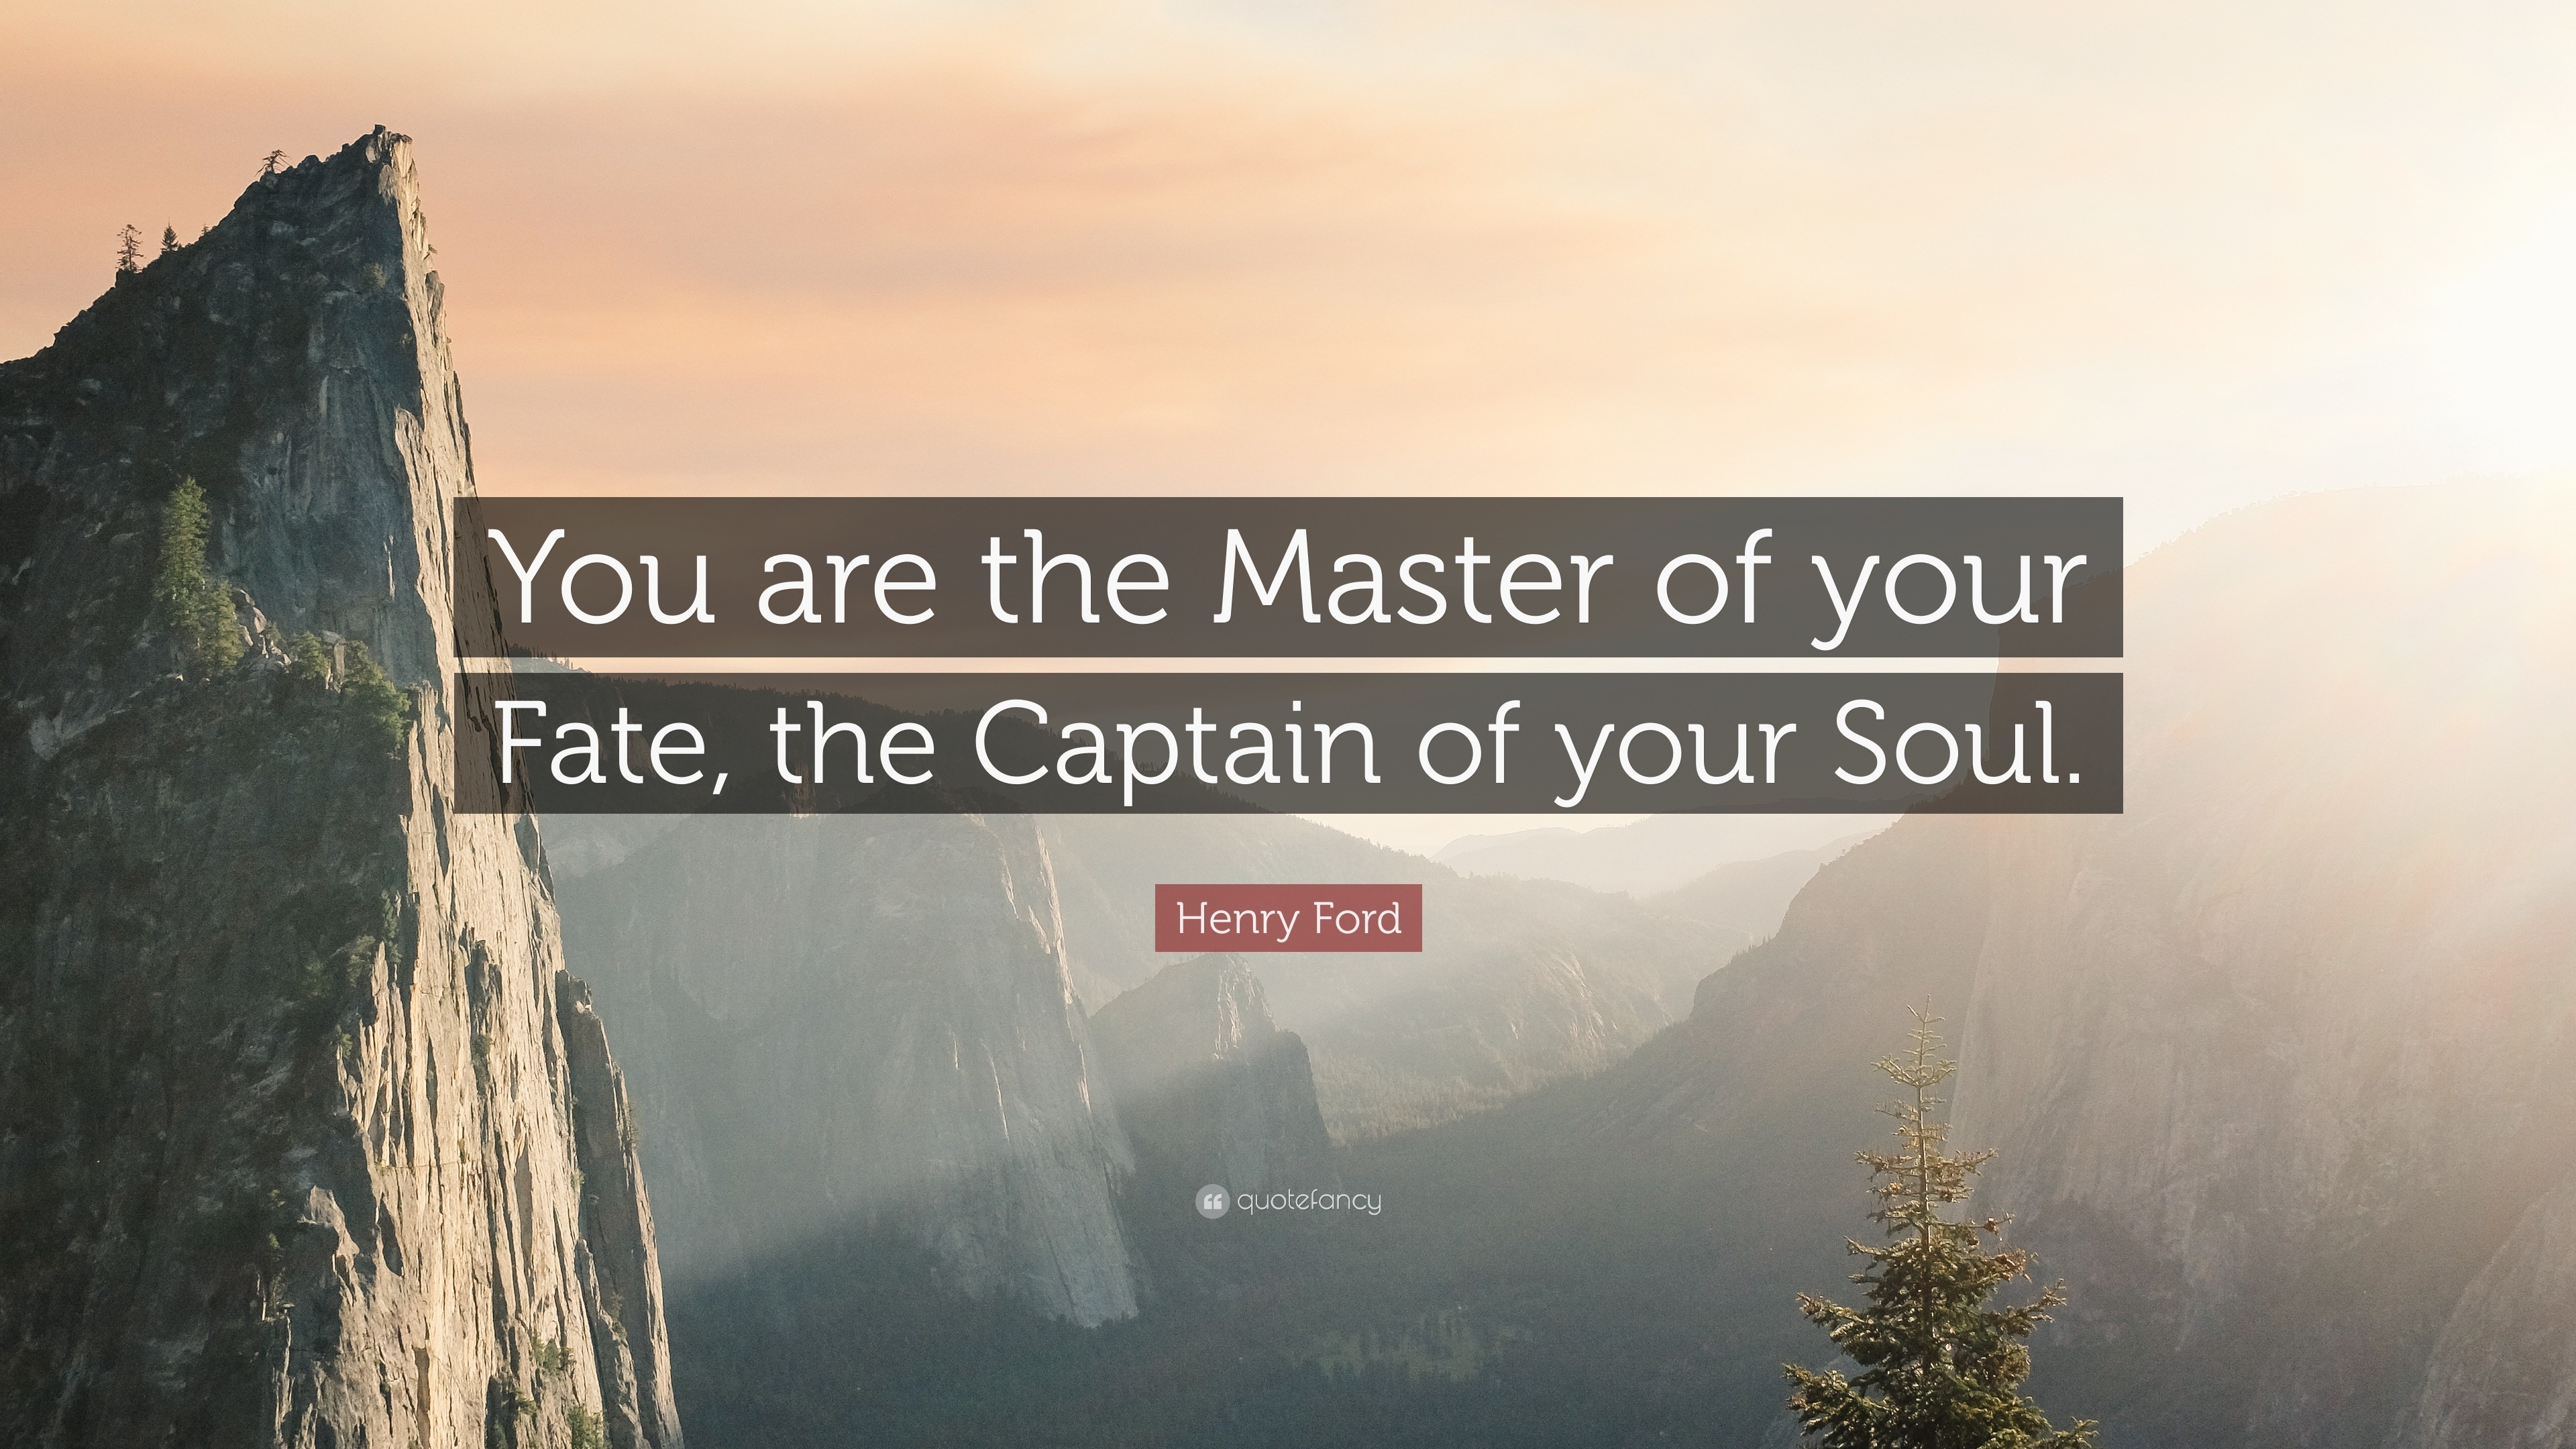 https://quotefancy.com/media/wallpaper/3840x2160/401950-Henry-Ford-Quote-You-are-the-Master-of-your-Fate-the-Captain-of.jpg